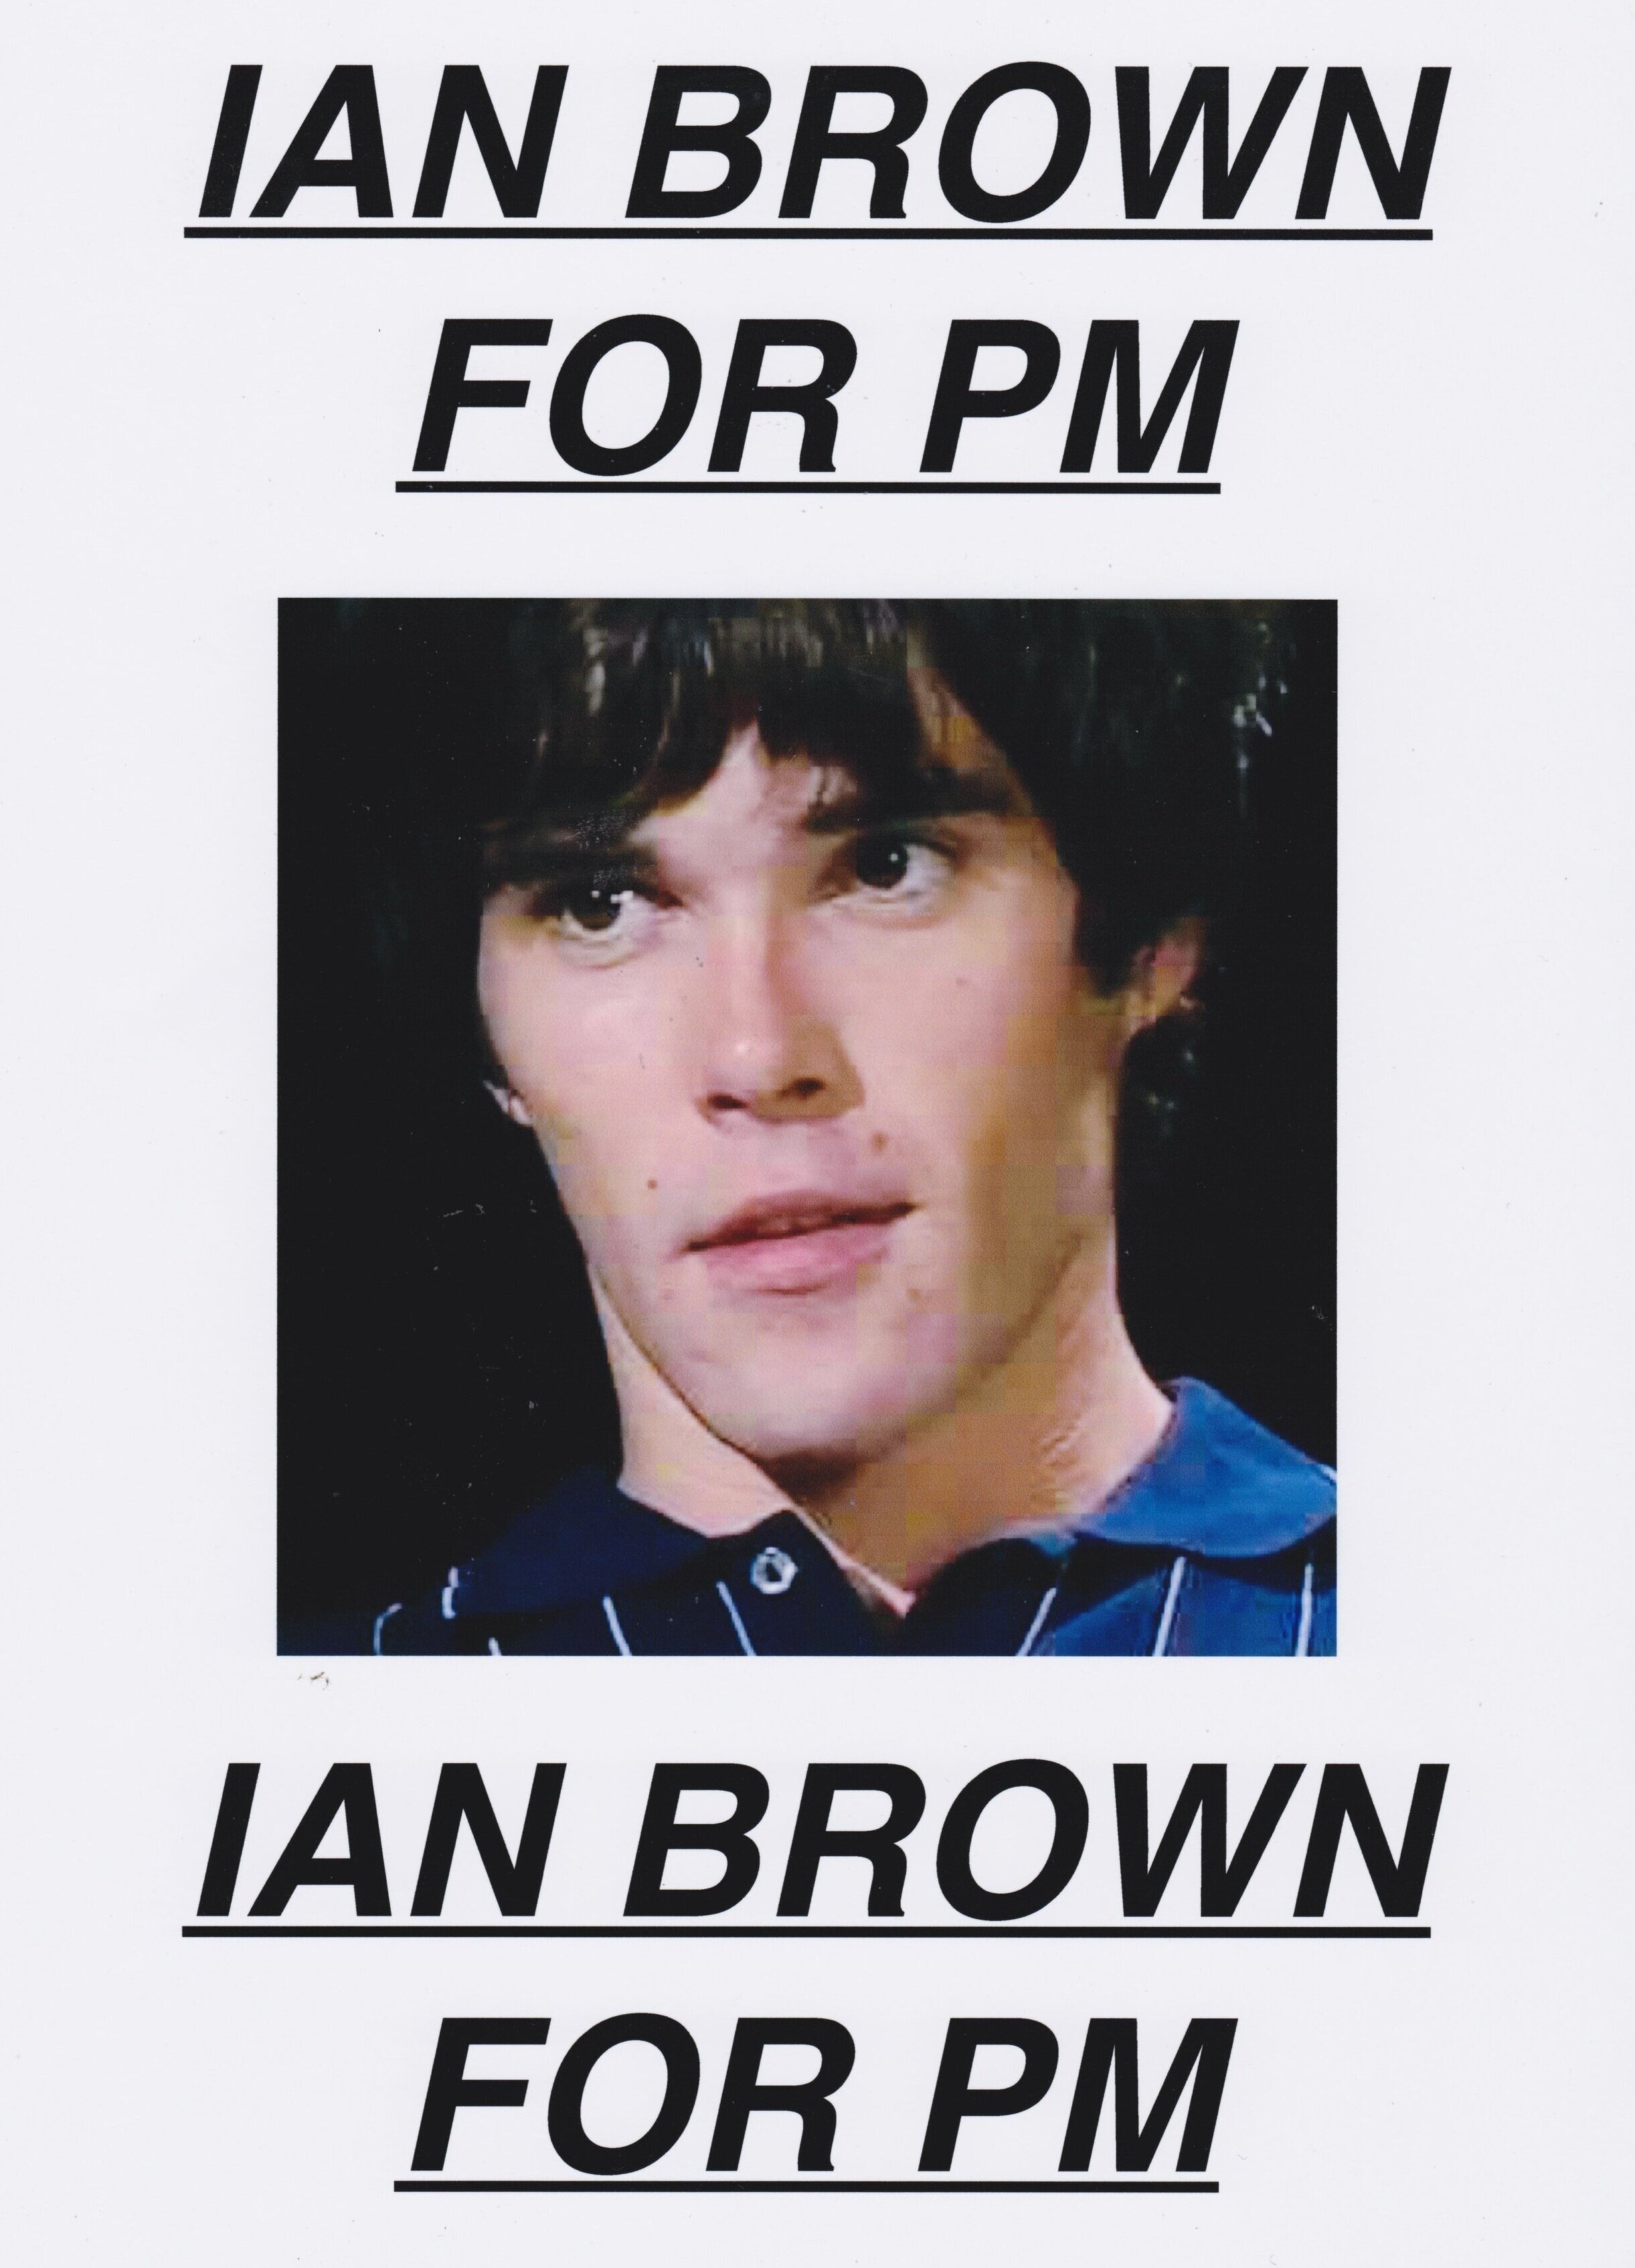   Ian Brown for PM on Jarvis Cocker’s Sunday Service  